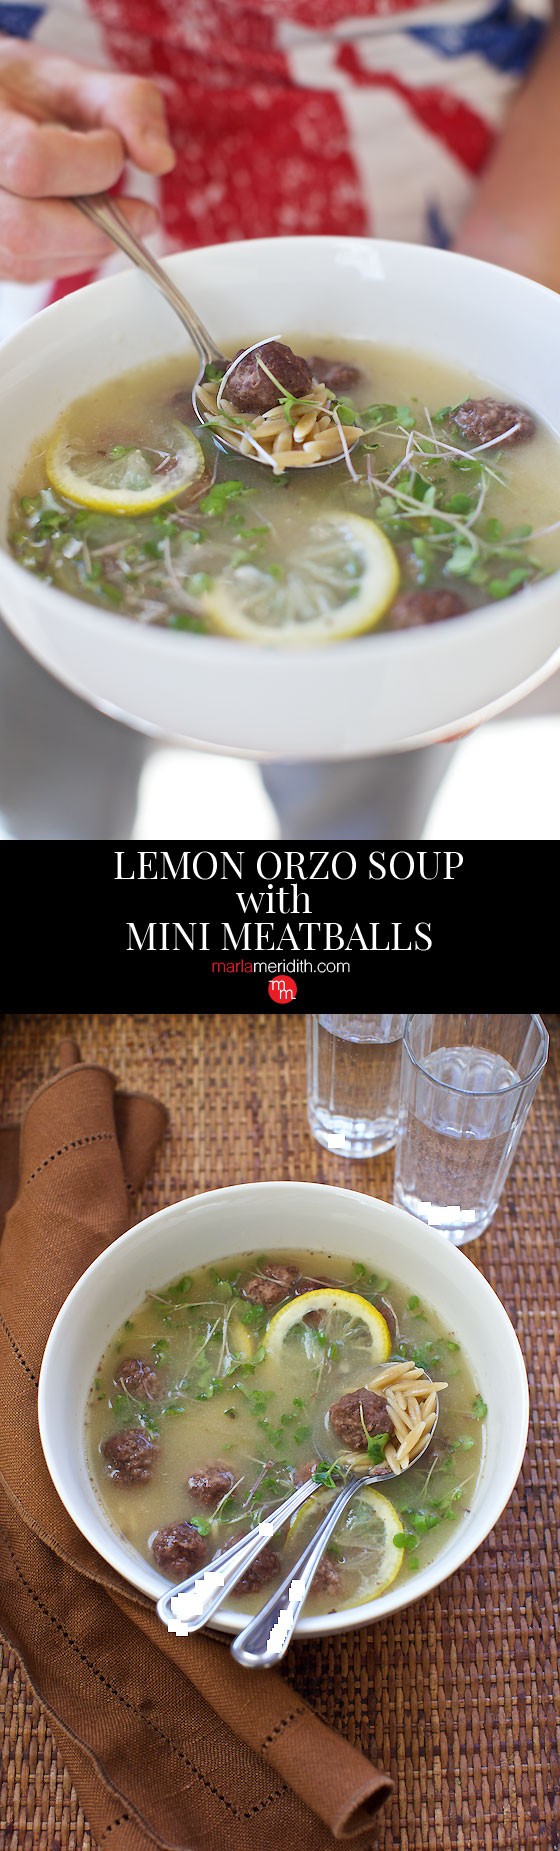 Lemon Orzo Soup with Mini Meatballs | This soup can be on your table in just 12 minutes! MarlaMeridith.com ( @marlameridith )